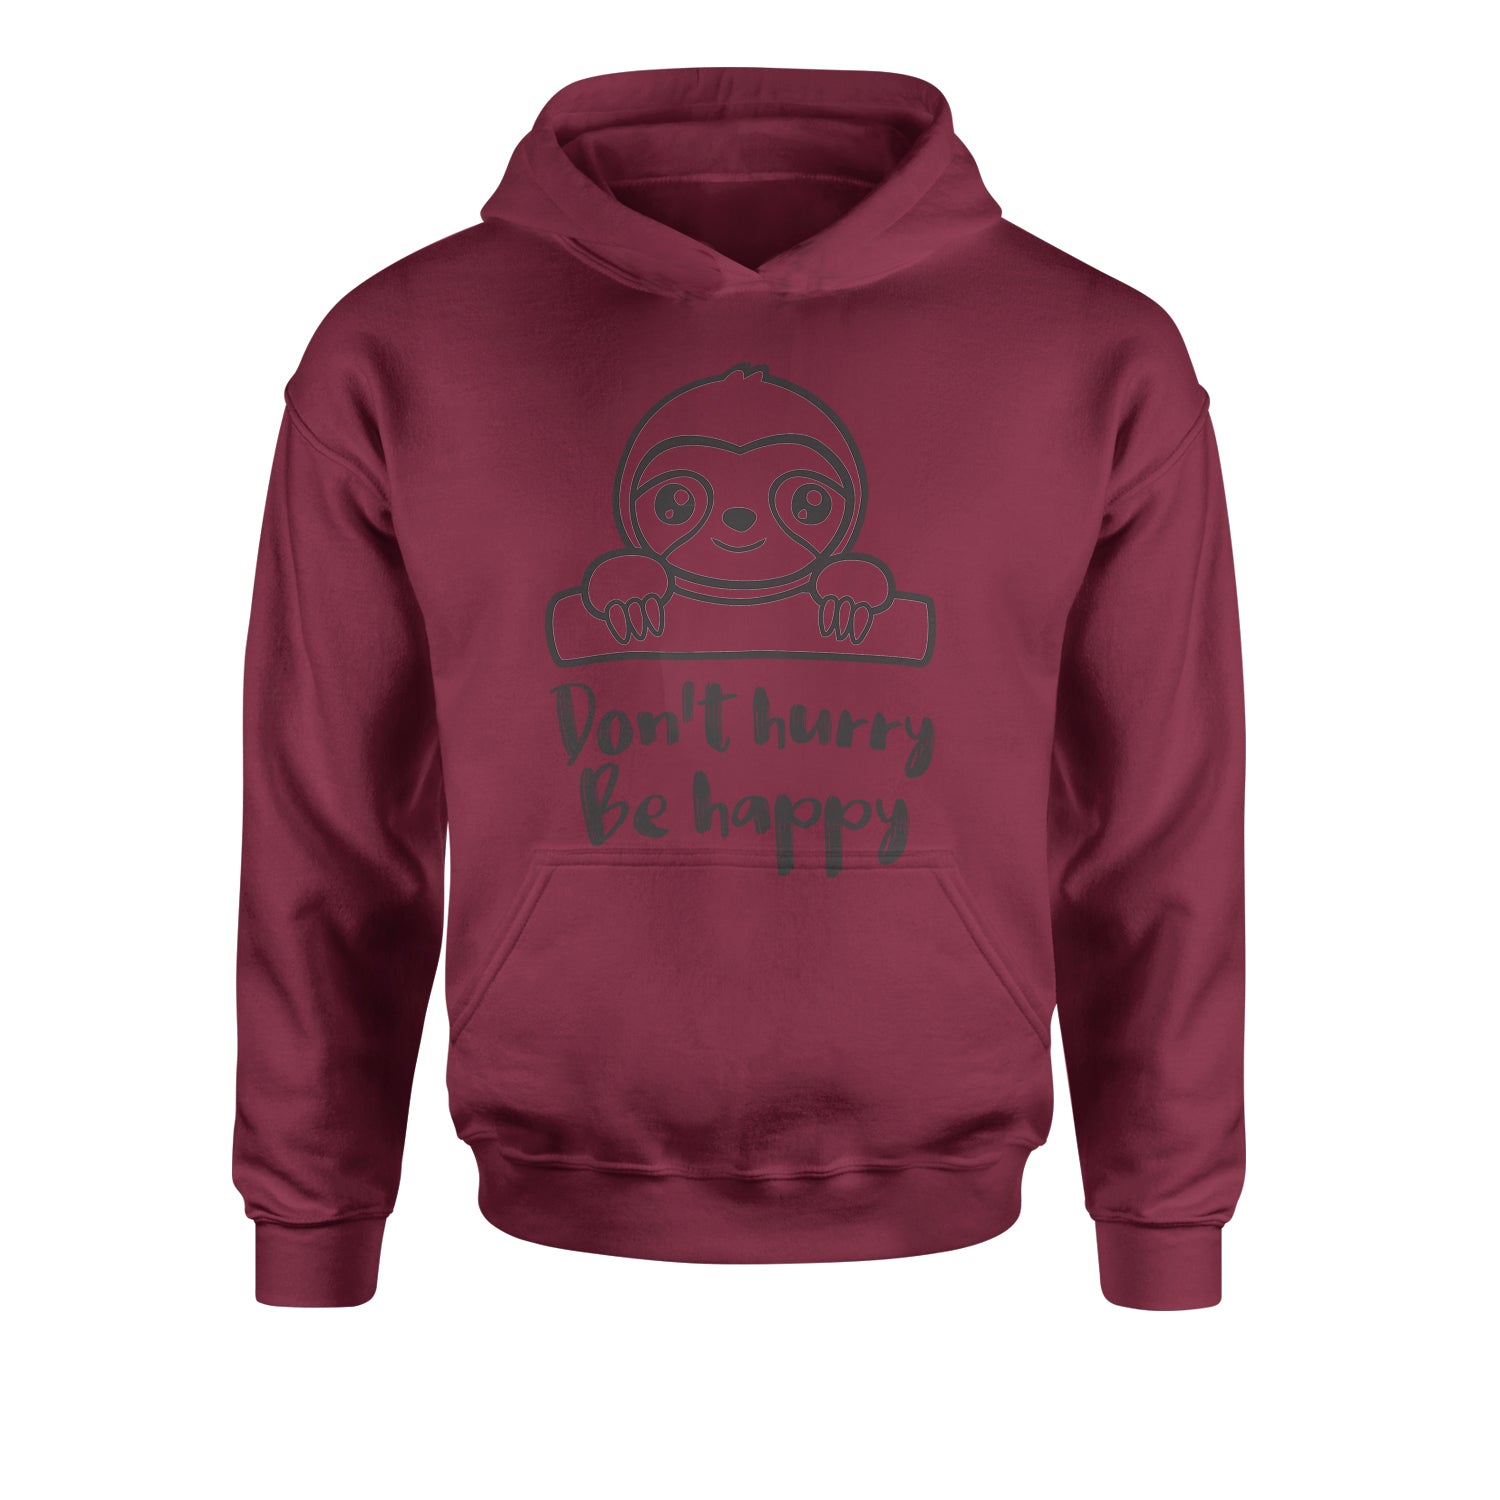 Sloth Don't Hurry Be Happy Youth-Sized Hoodie fun, funny, sloth, sloths by Expression Tees